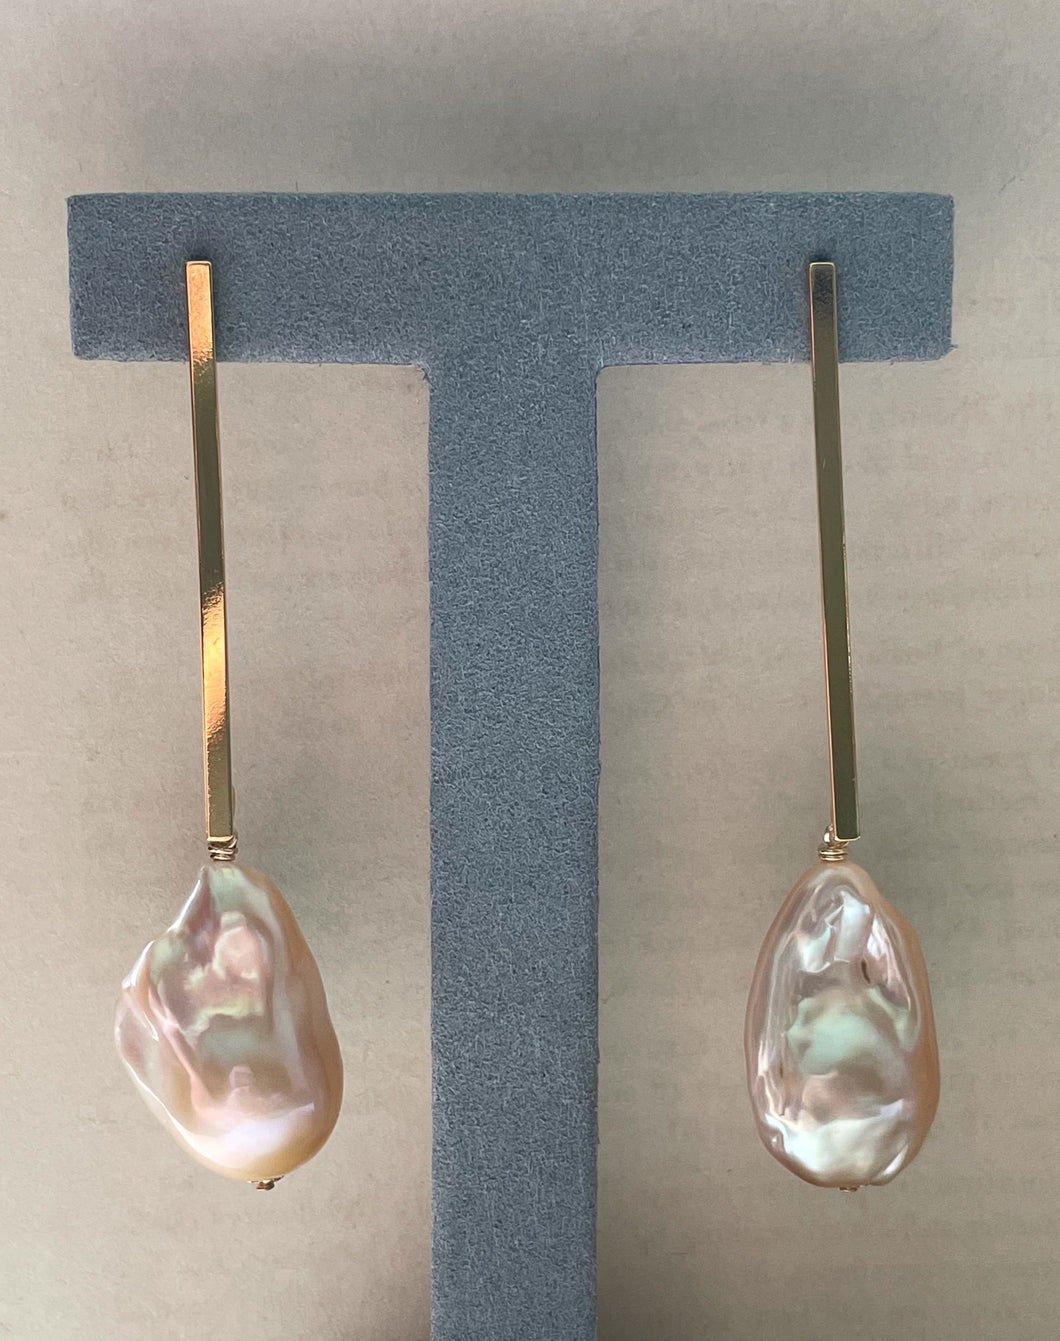 Large Peach Baroque Pearls on Goldplated Long Bars